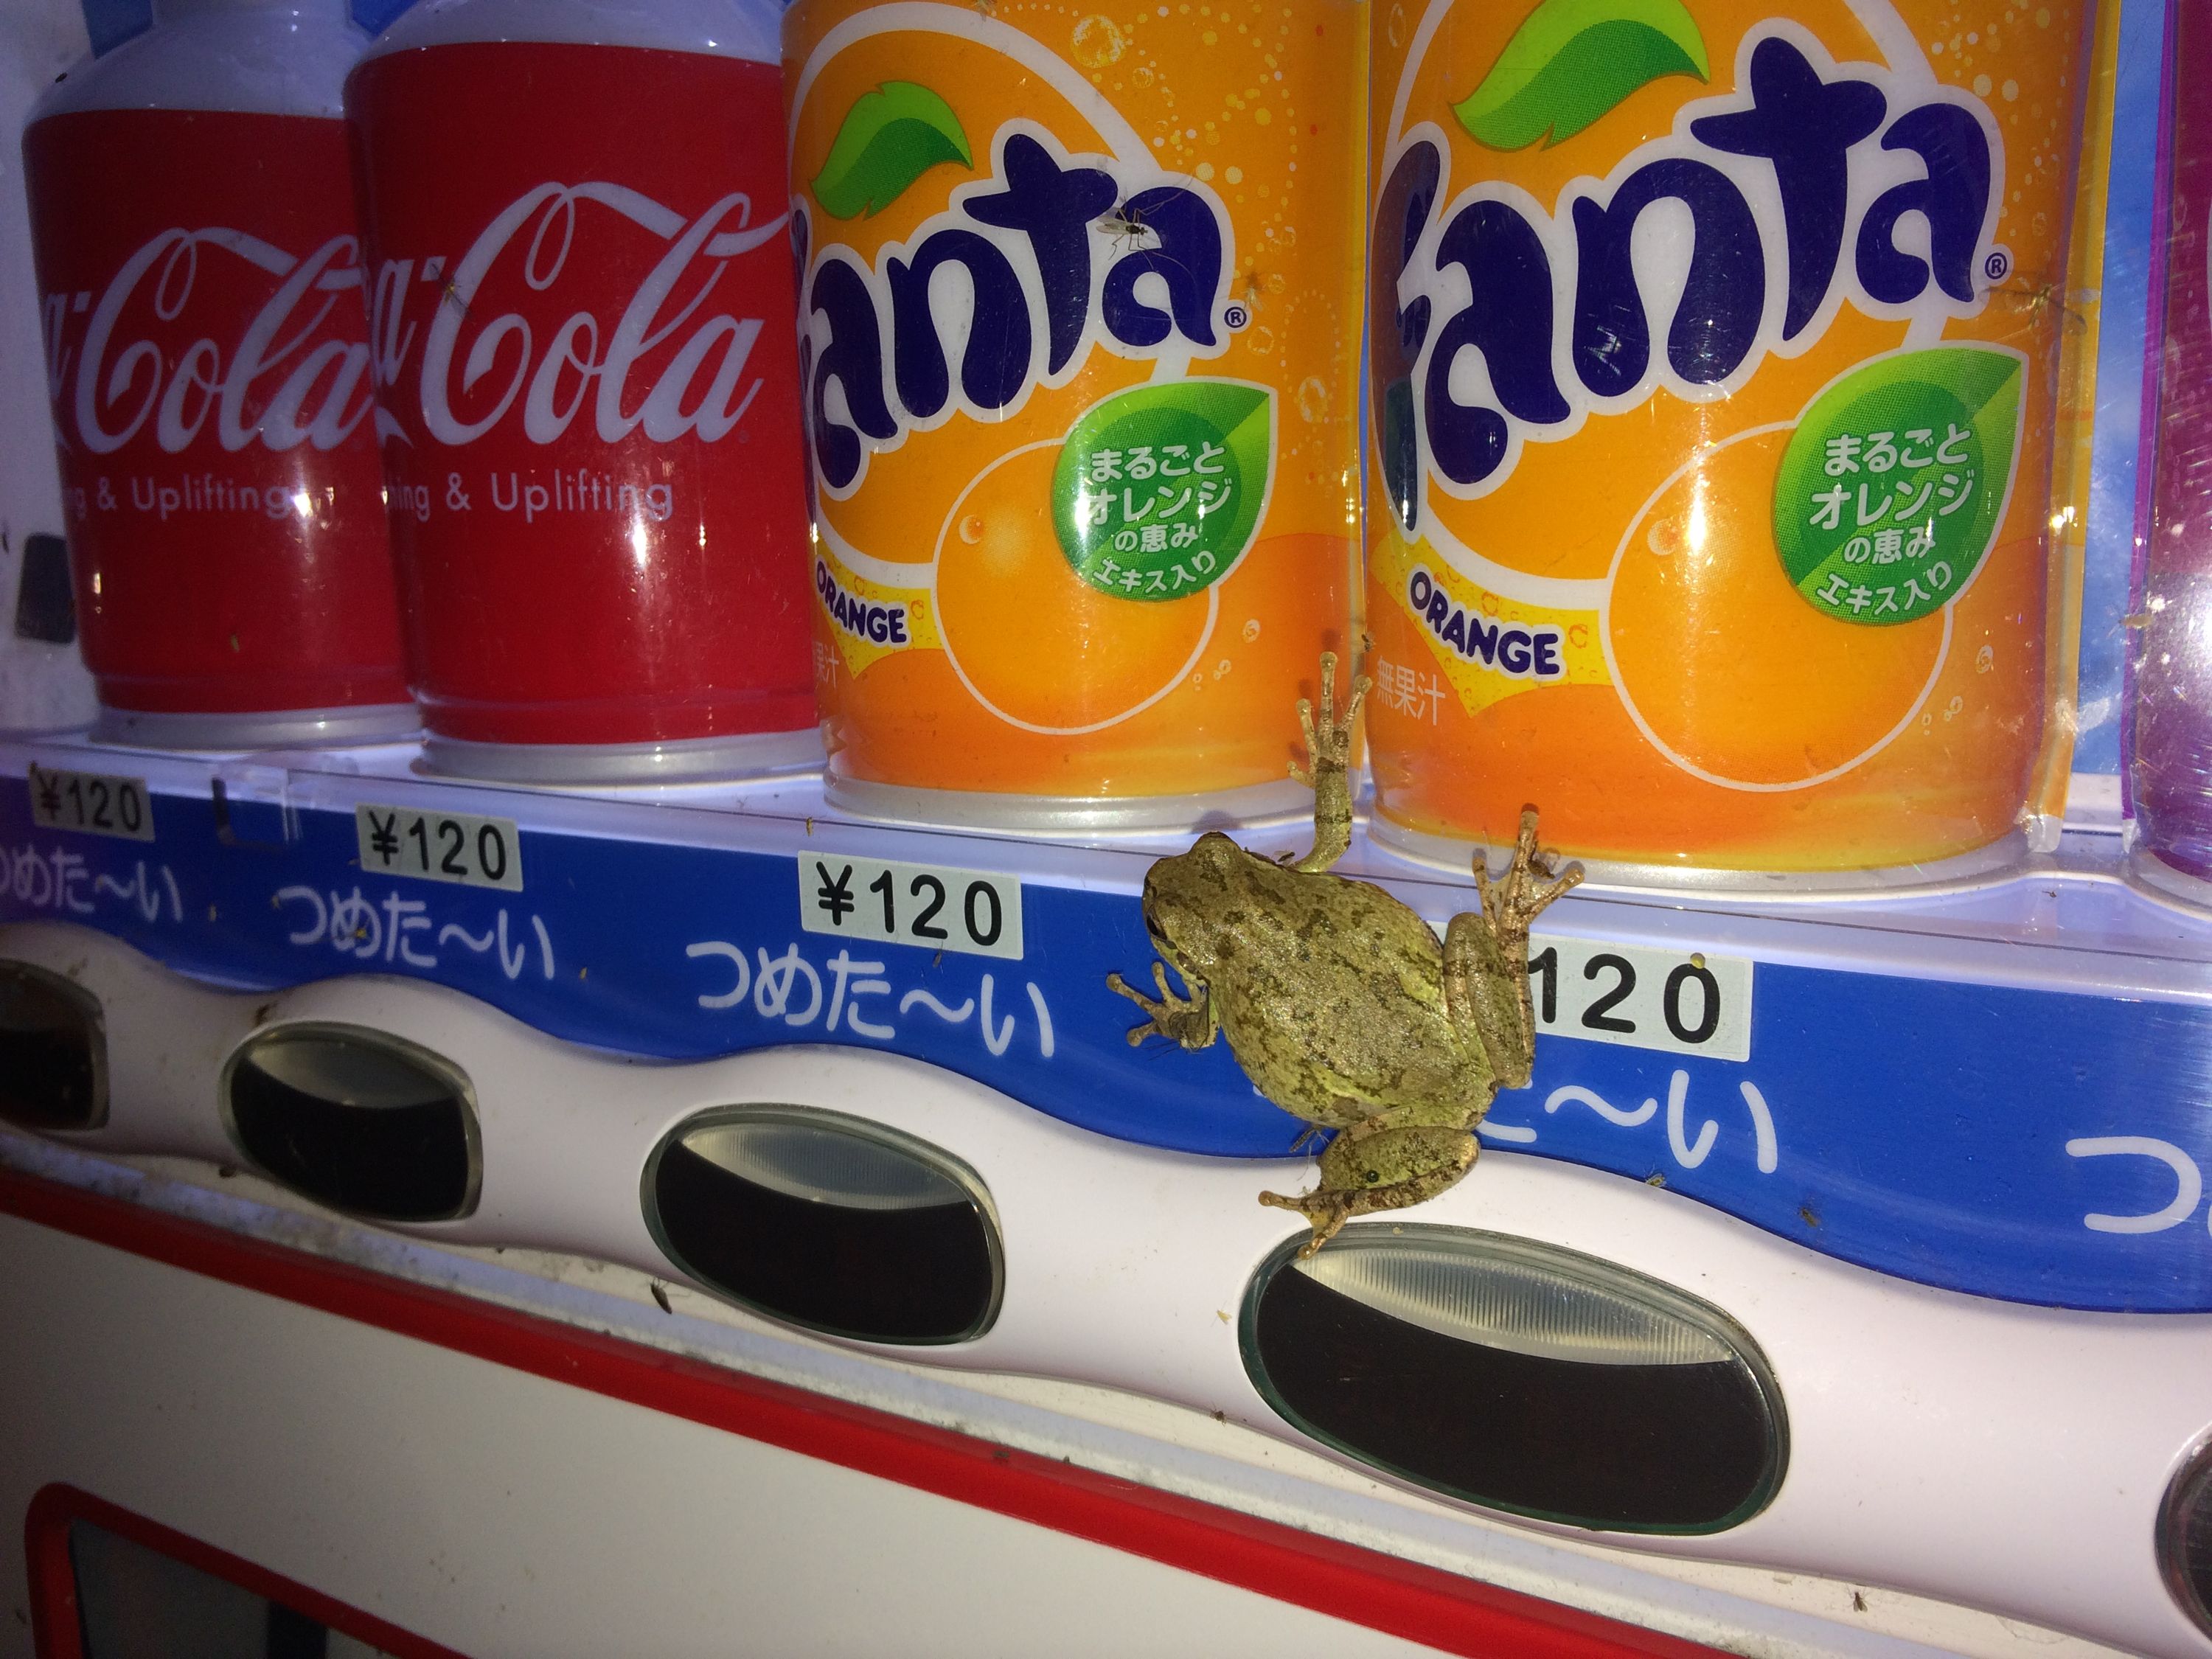 A large frog climbs across the display of a vending machine, showing cans of Coke and Fanta, in the darkness.